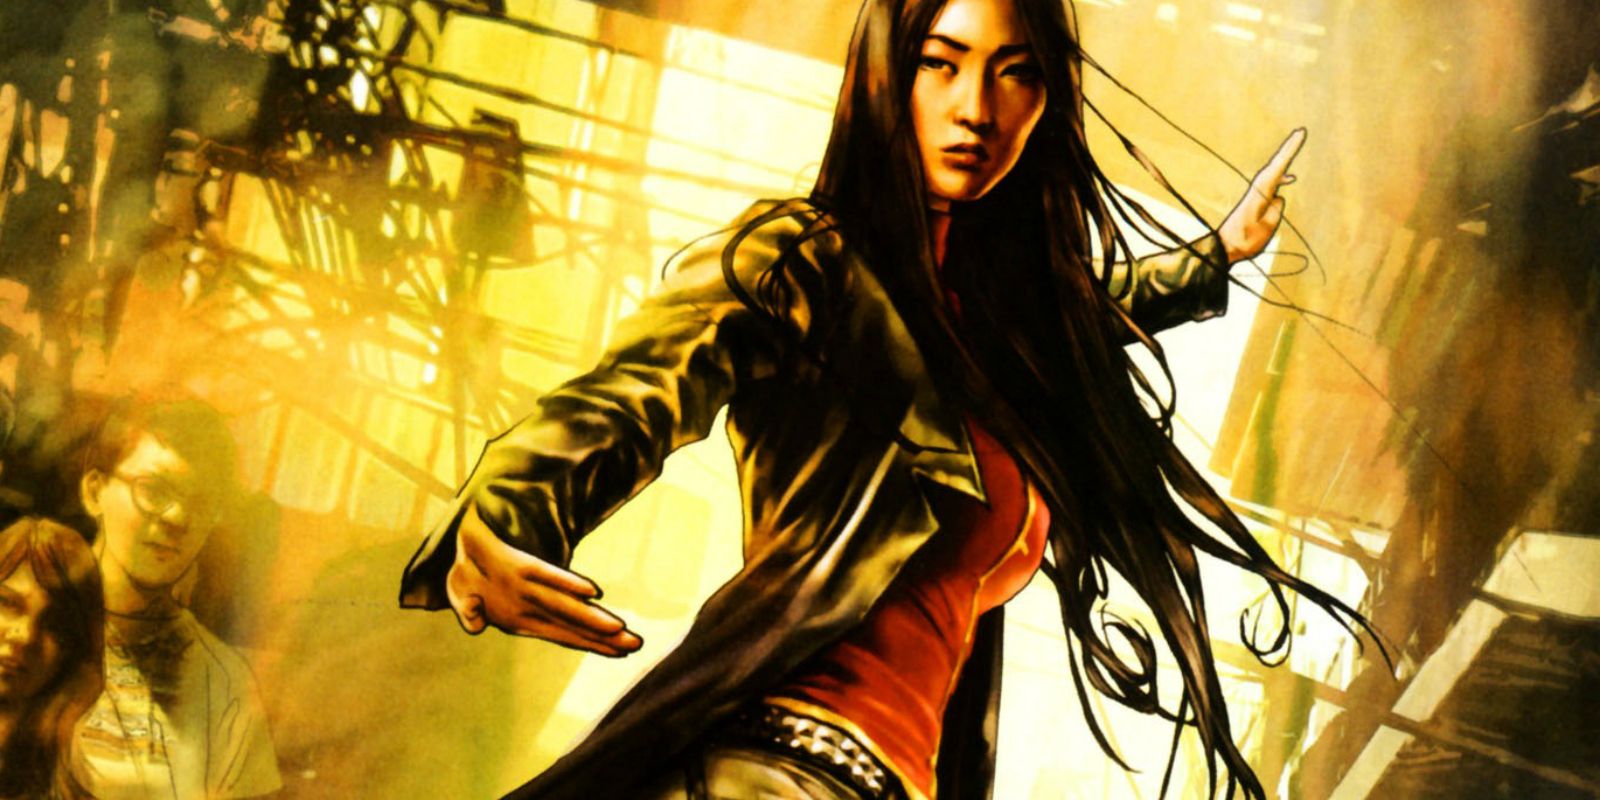 Lady Shiva stands ready and awaits her opponent's next move.